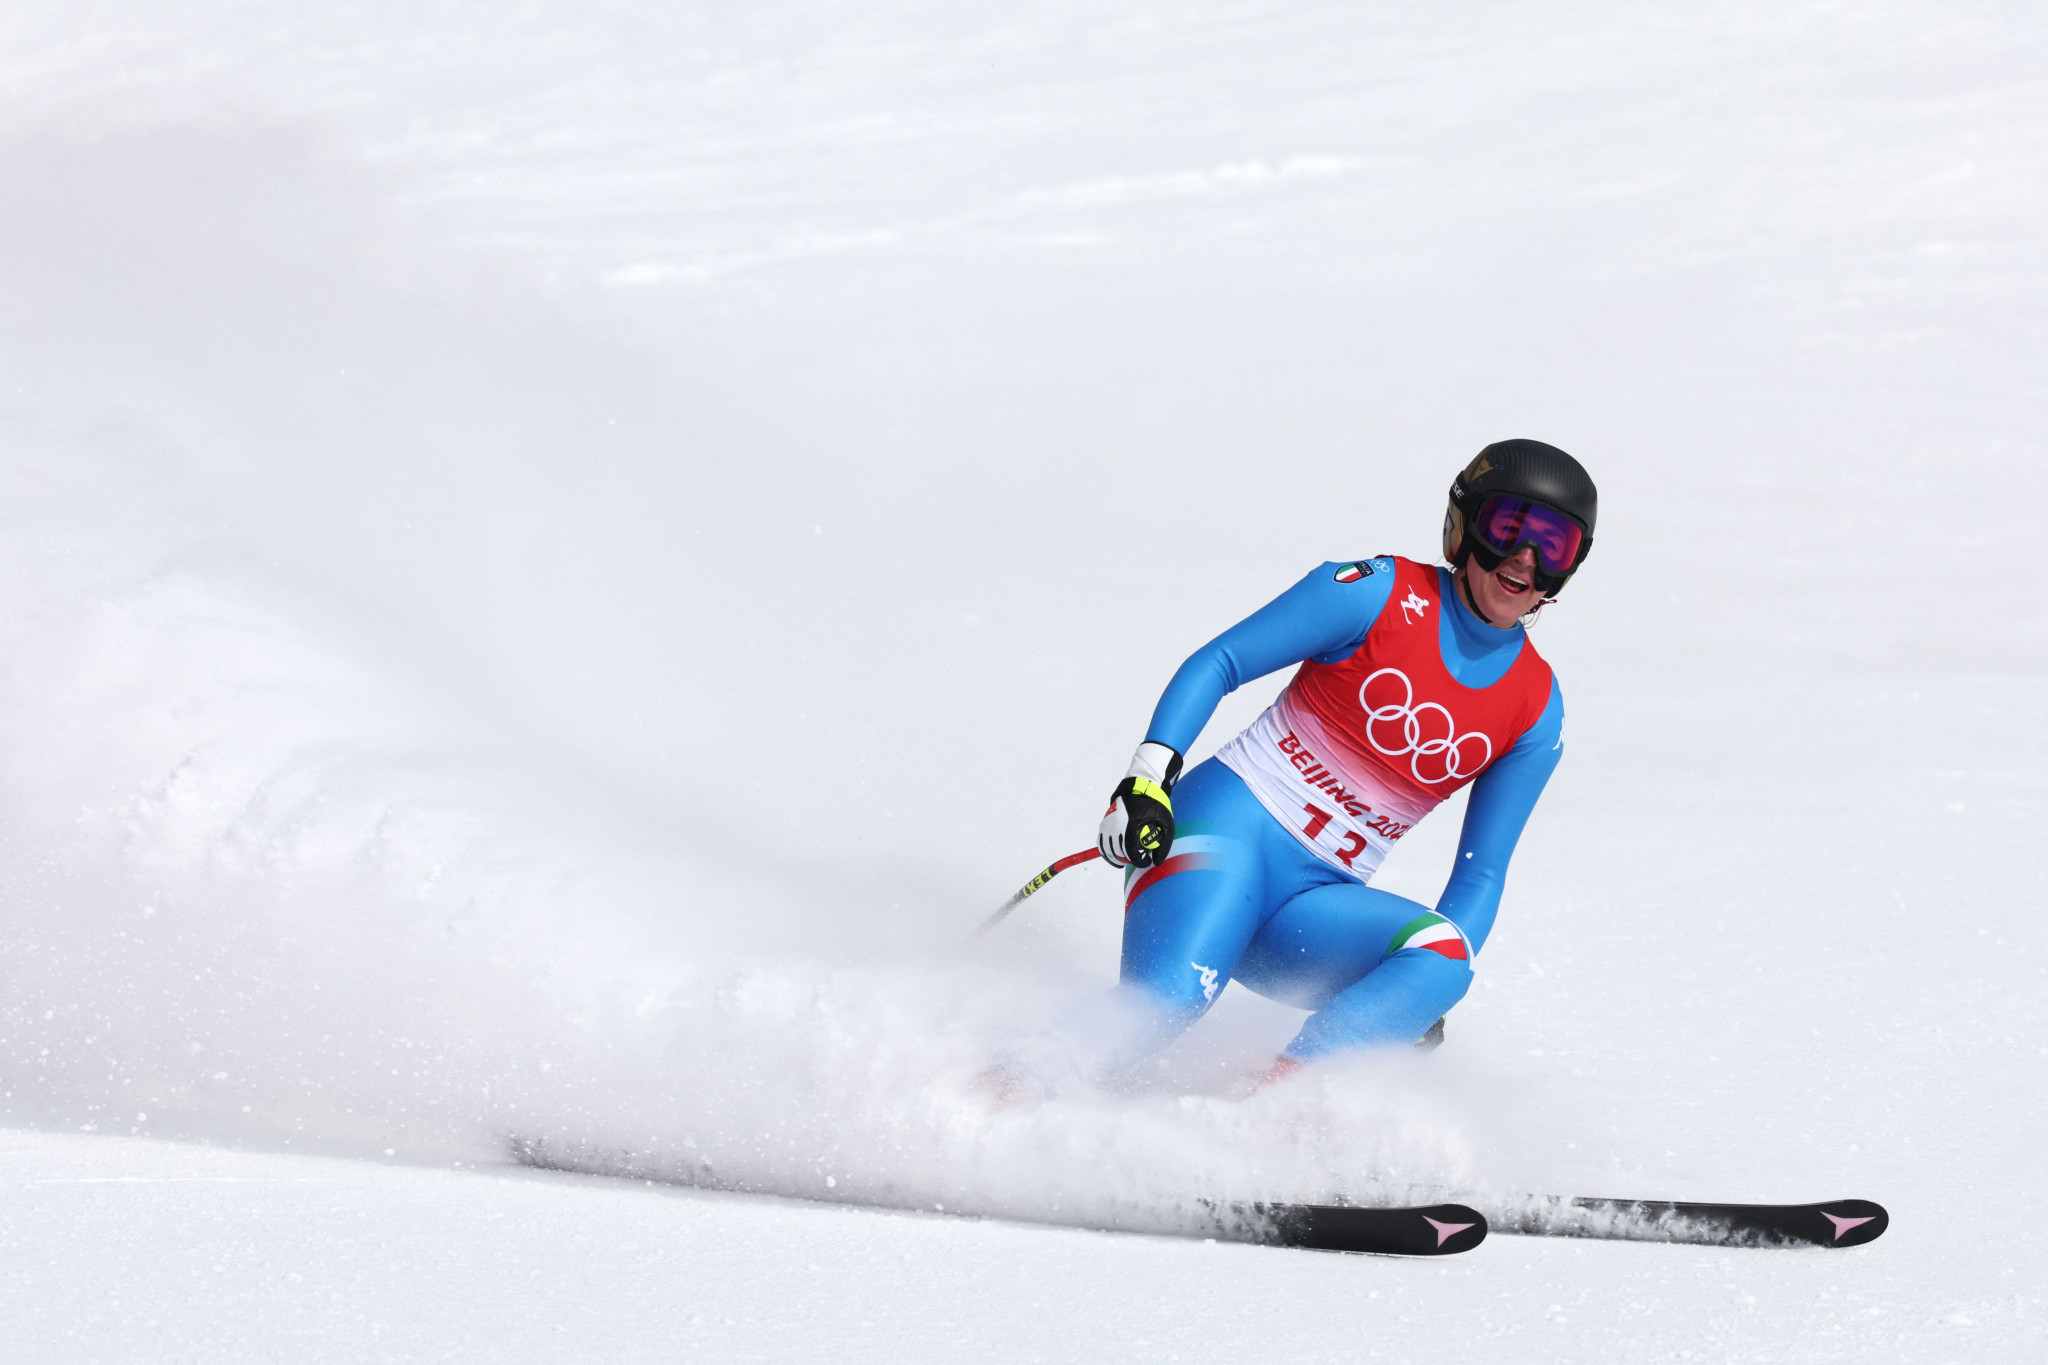 Italy's Sofia Goggia finished second to Corinne Suter of Switzerland in the women's Alpine skiing downhill event having battled through the pain barrier with anterior cruciate ligament damage ©Getty Images